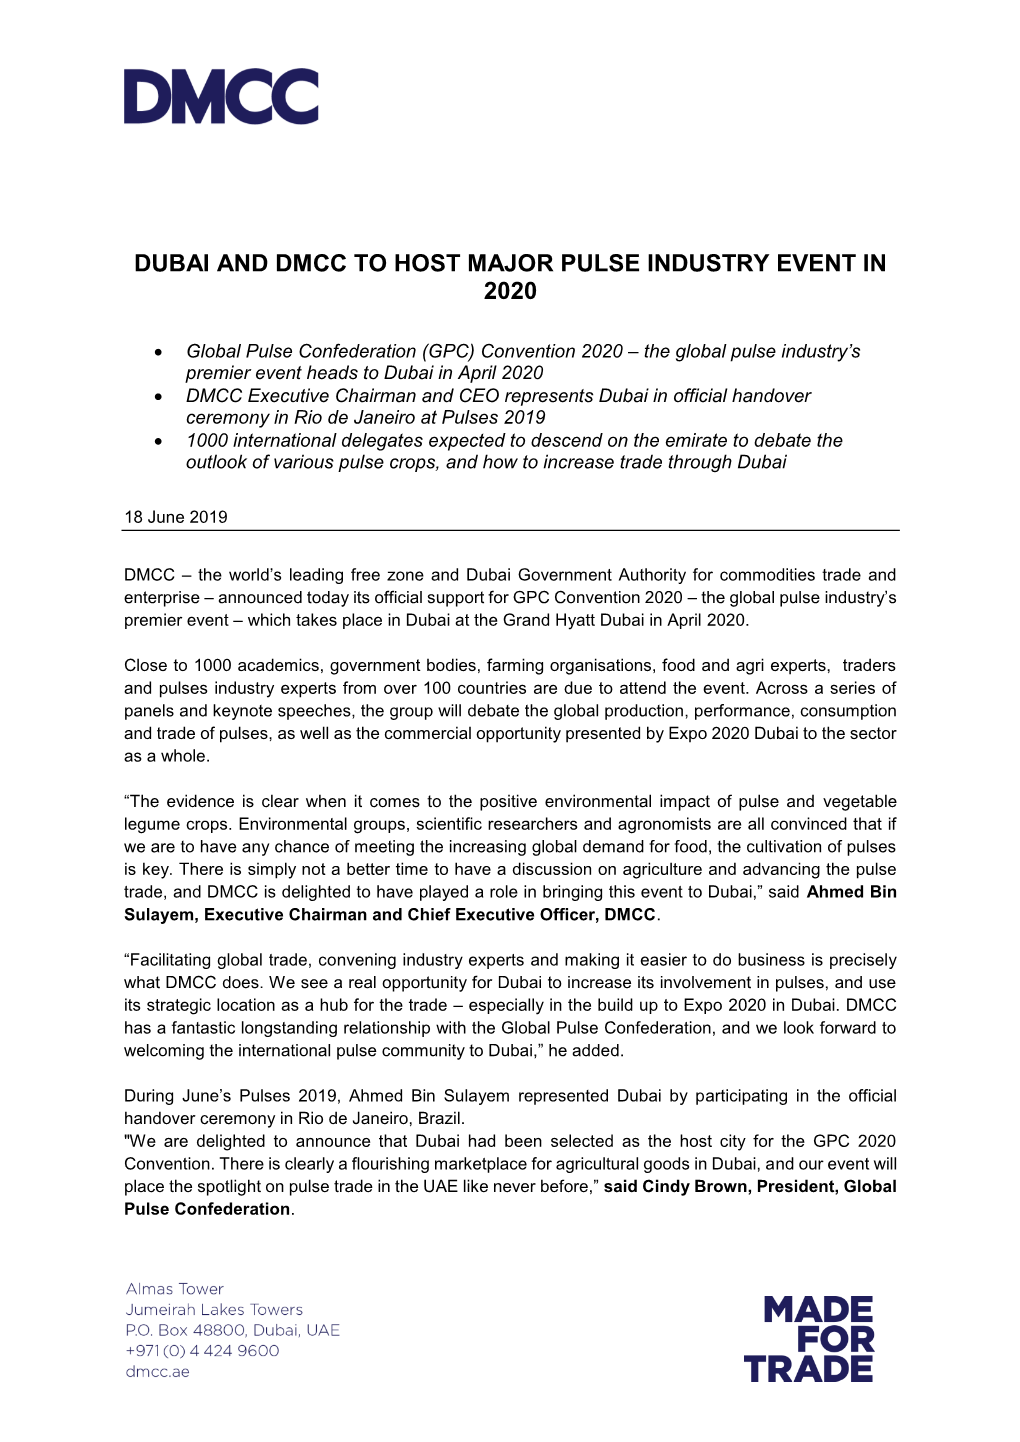 Dubai and Dmcc to Host Major Pulse Industry Event in 2020